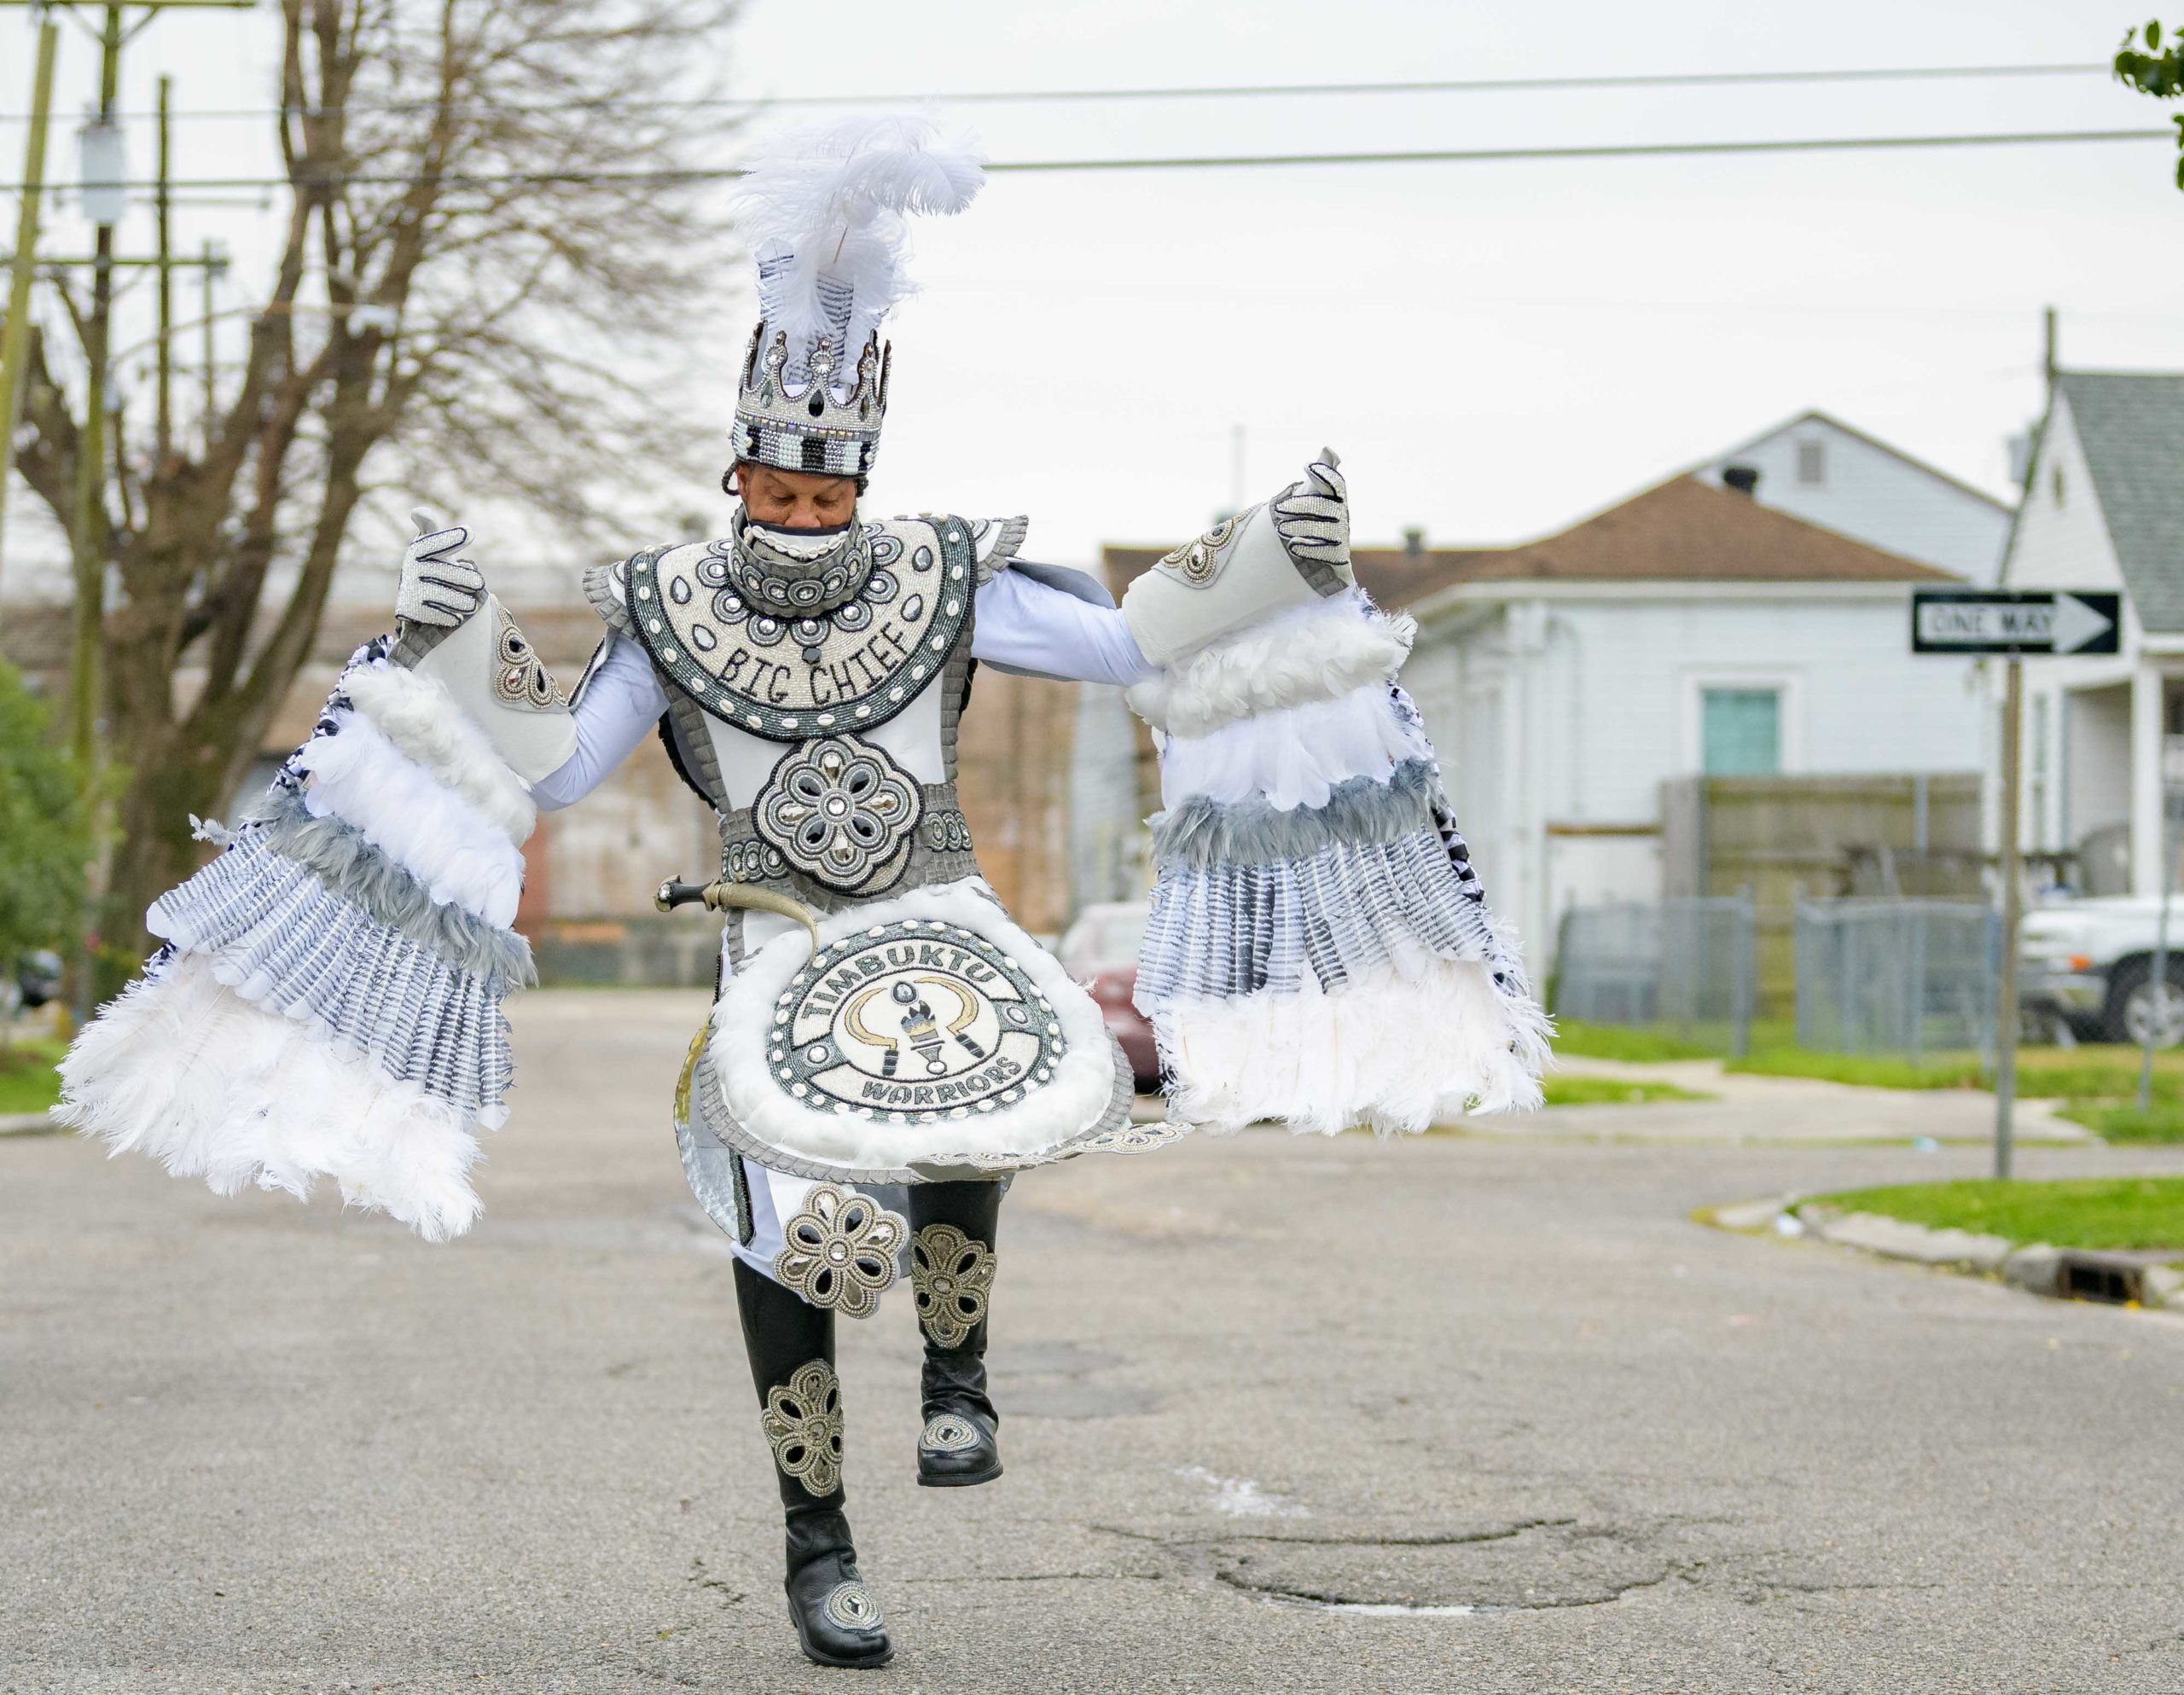 Early that mornin’ a house float came to life on Mardi Gras as Big Chief Dow Edwards of the Timbuktu Warriors paraded around the block of his home on Amelia Street in the Riverside neighborhood in New Orleans on Fat Tuesday, Feb 16, 2021. The weeks leading up to Mardi Gras Big Chief Dow displayed suits from his time as Spy Boy for the Mohawk Hunters as his house float. The Krewe of House Floats is an initiative to decorate homes during the Carnival season because of the cancellation and postponement of parades and gatherings for Mardi Gras 2021 due to the COVID-19 pandemic. Avoiding a crowd and staying off Magazine Street, Big Chief Dow and his gang / tribe of Black Masking Carnival Indians greeted neighbors from a safe distance while being masked up for the COVID-19 pandemic. @BigChiefDow was accompanied by his War Chief Bennie “Stickman” Russell, pink feathers, 3rd Chief Roderick Mitchell, light pink and purple, Second chief James Payne, white feathers, Gang Flag Milton Wright, green feathers, and wild man Jeffery Vincent, red and black feathers. Photo by Matthew Hinton